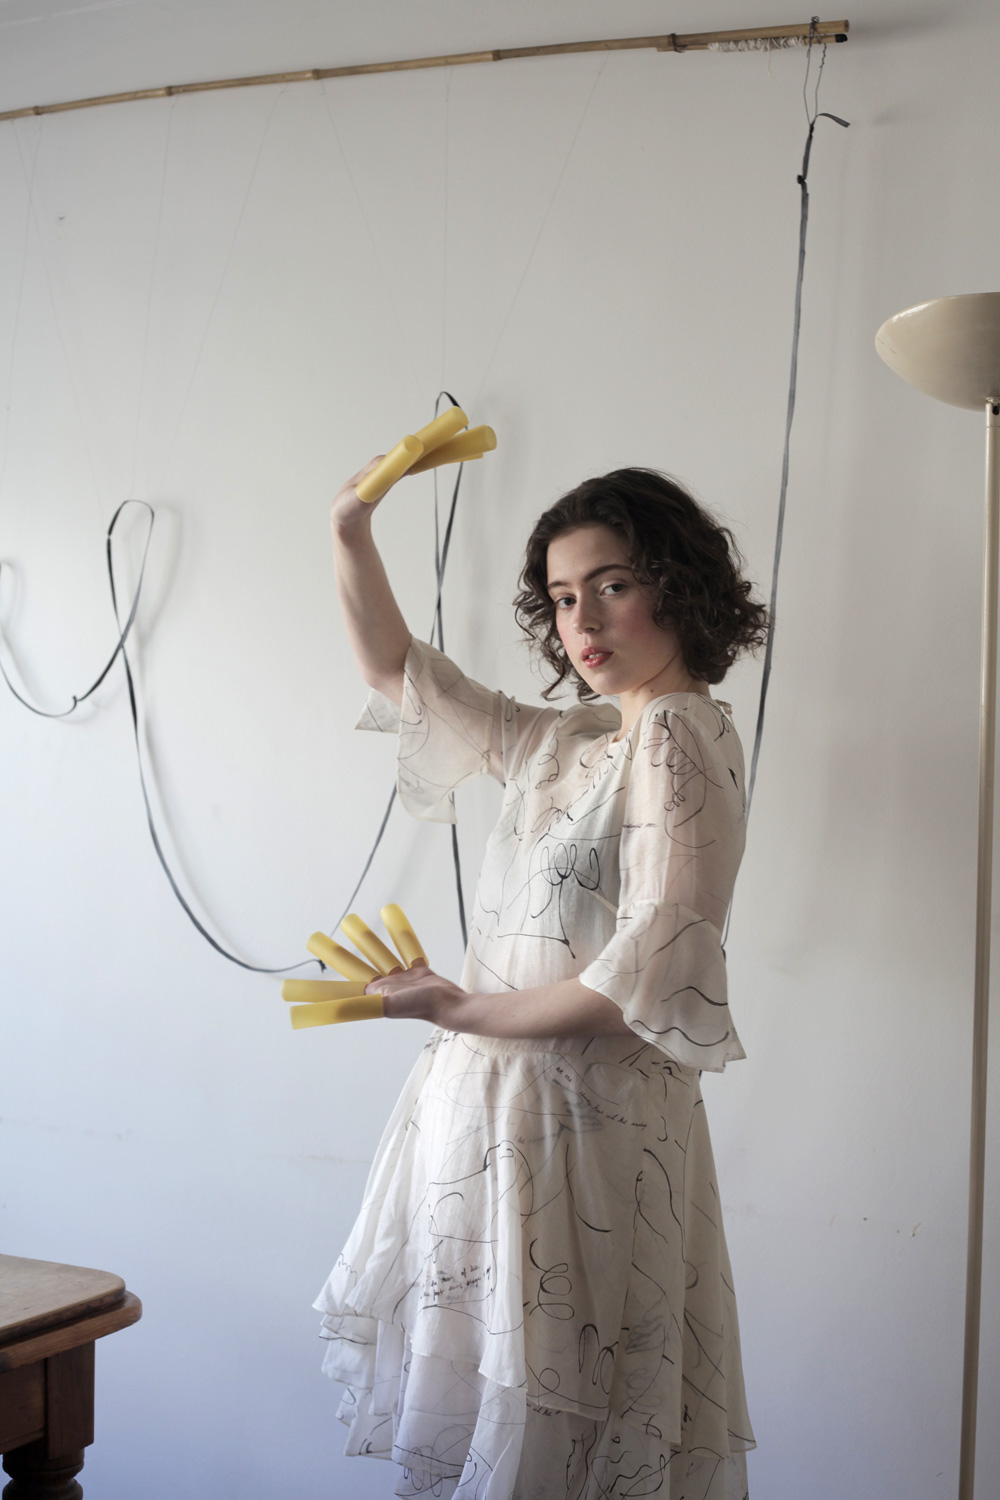 Pasta Girlfriend by Alix-Rose Cowie and Stephanie Anastasopoulos